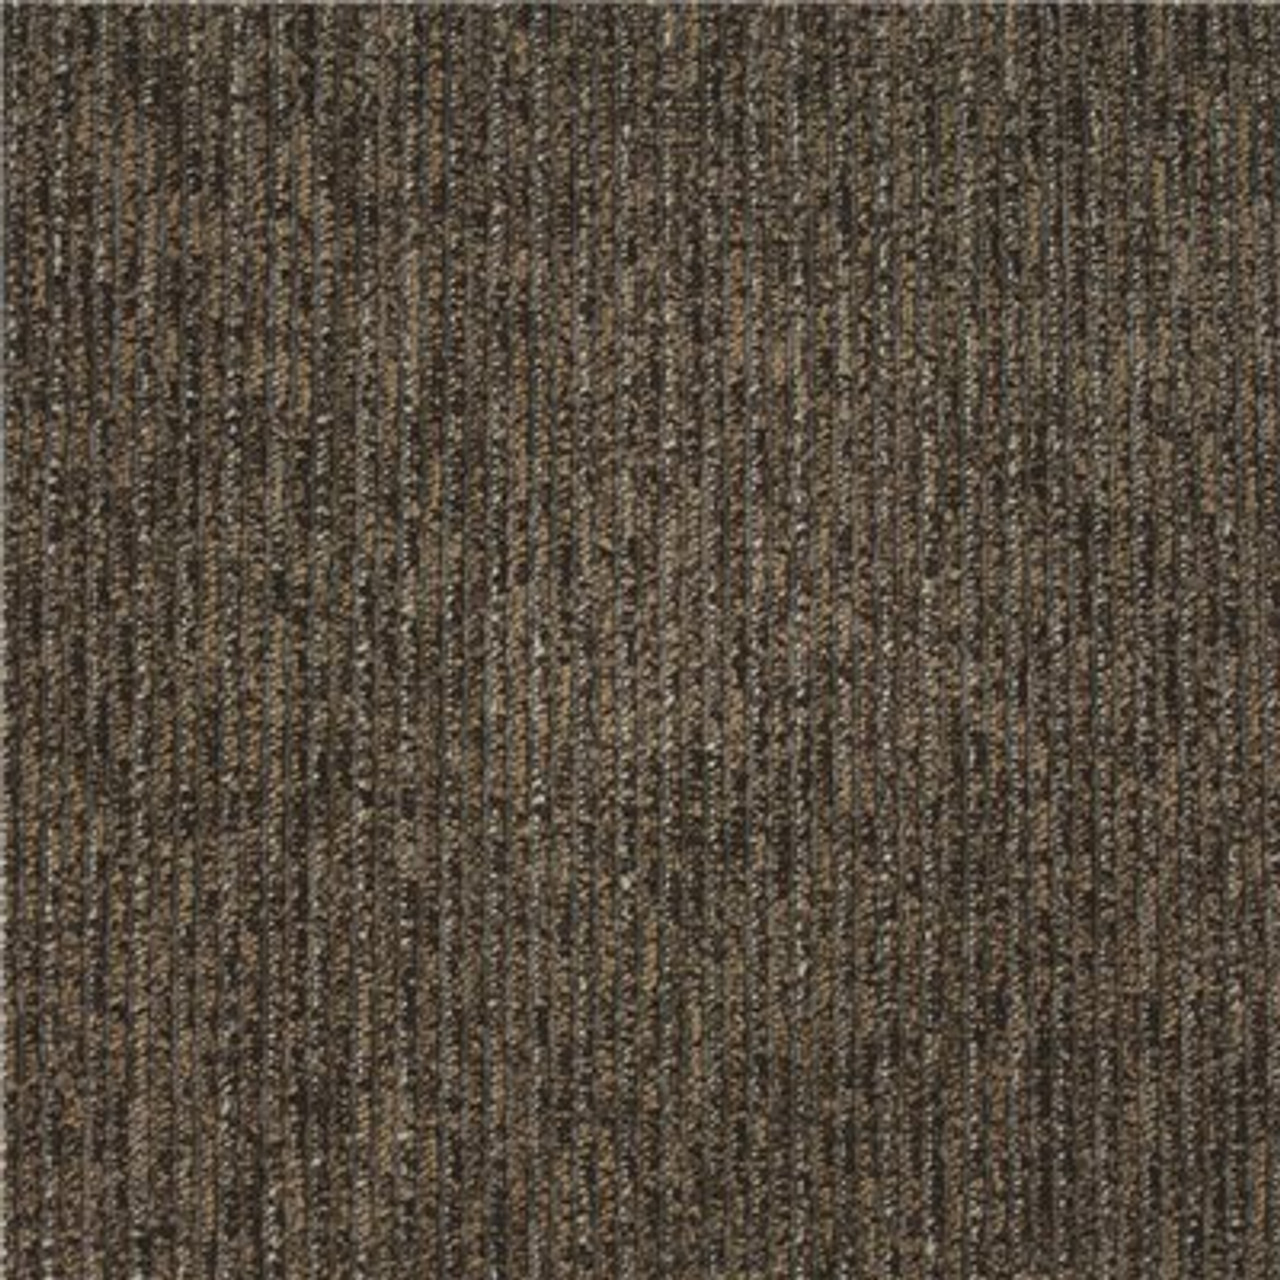 TrafficMaster Surge Brown Residential/Commercial 19.7 in. x 19.7 Glue-Down Carpet Tile (20 Tiles/Case) 54 sq. ft.